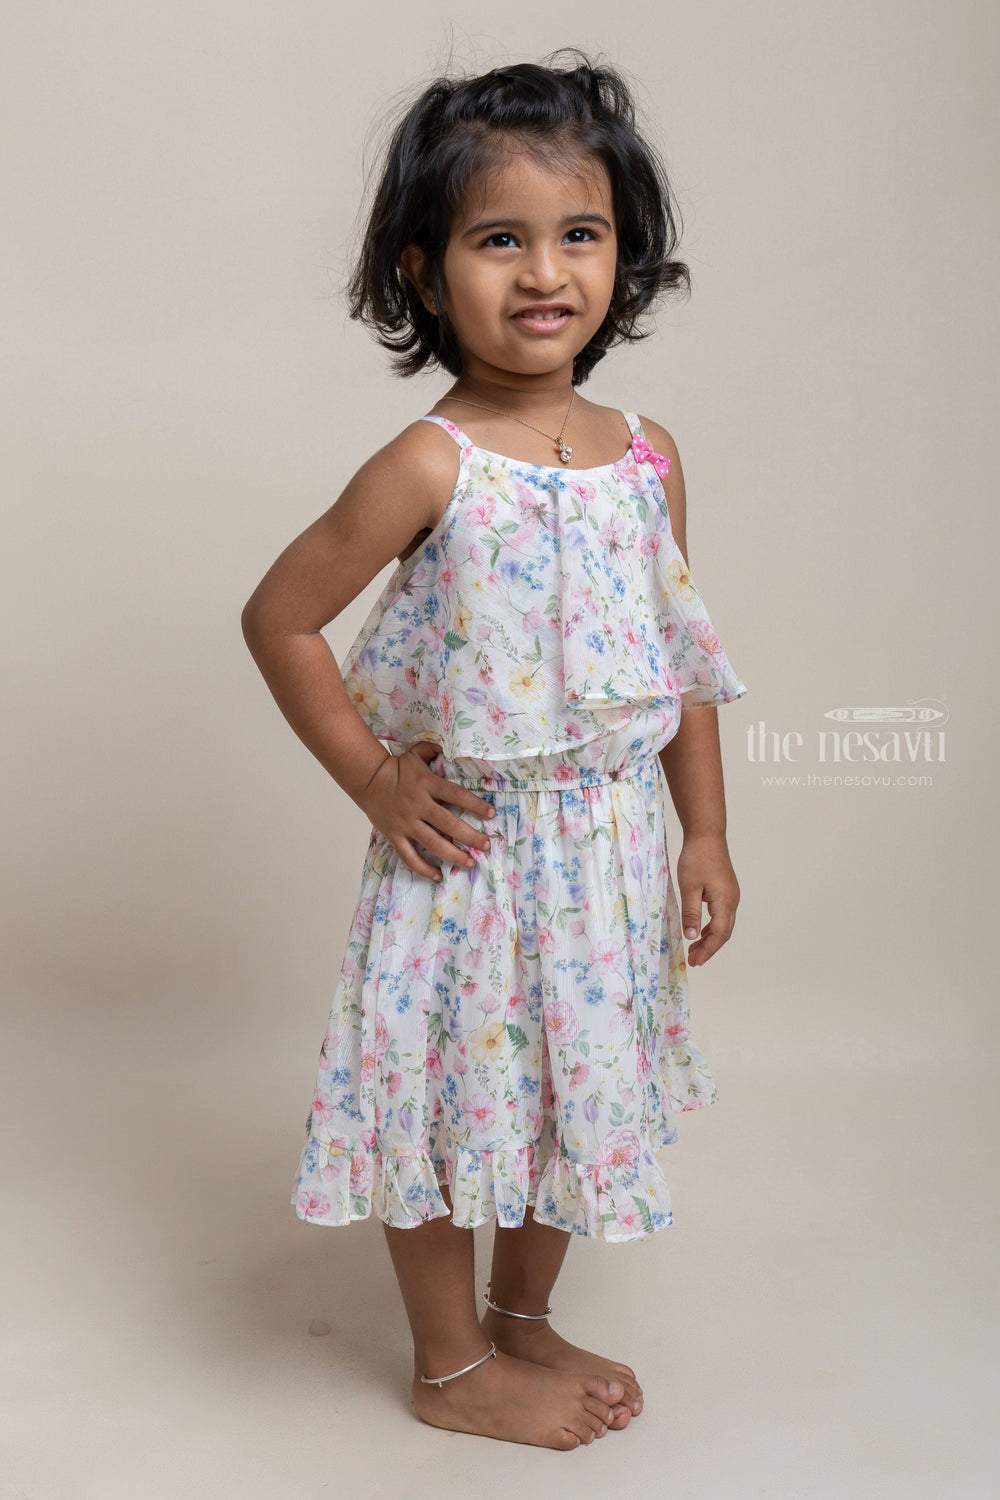 The Nesavu Baby Fancy Frock Stylish Multicolour Floral Printed Sleeveless Georgette Frock For Baby Girls Nesavu Comfortable Baby Frocks online | Party Frocks For Babies | The Nesavu